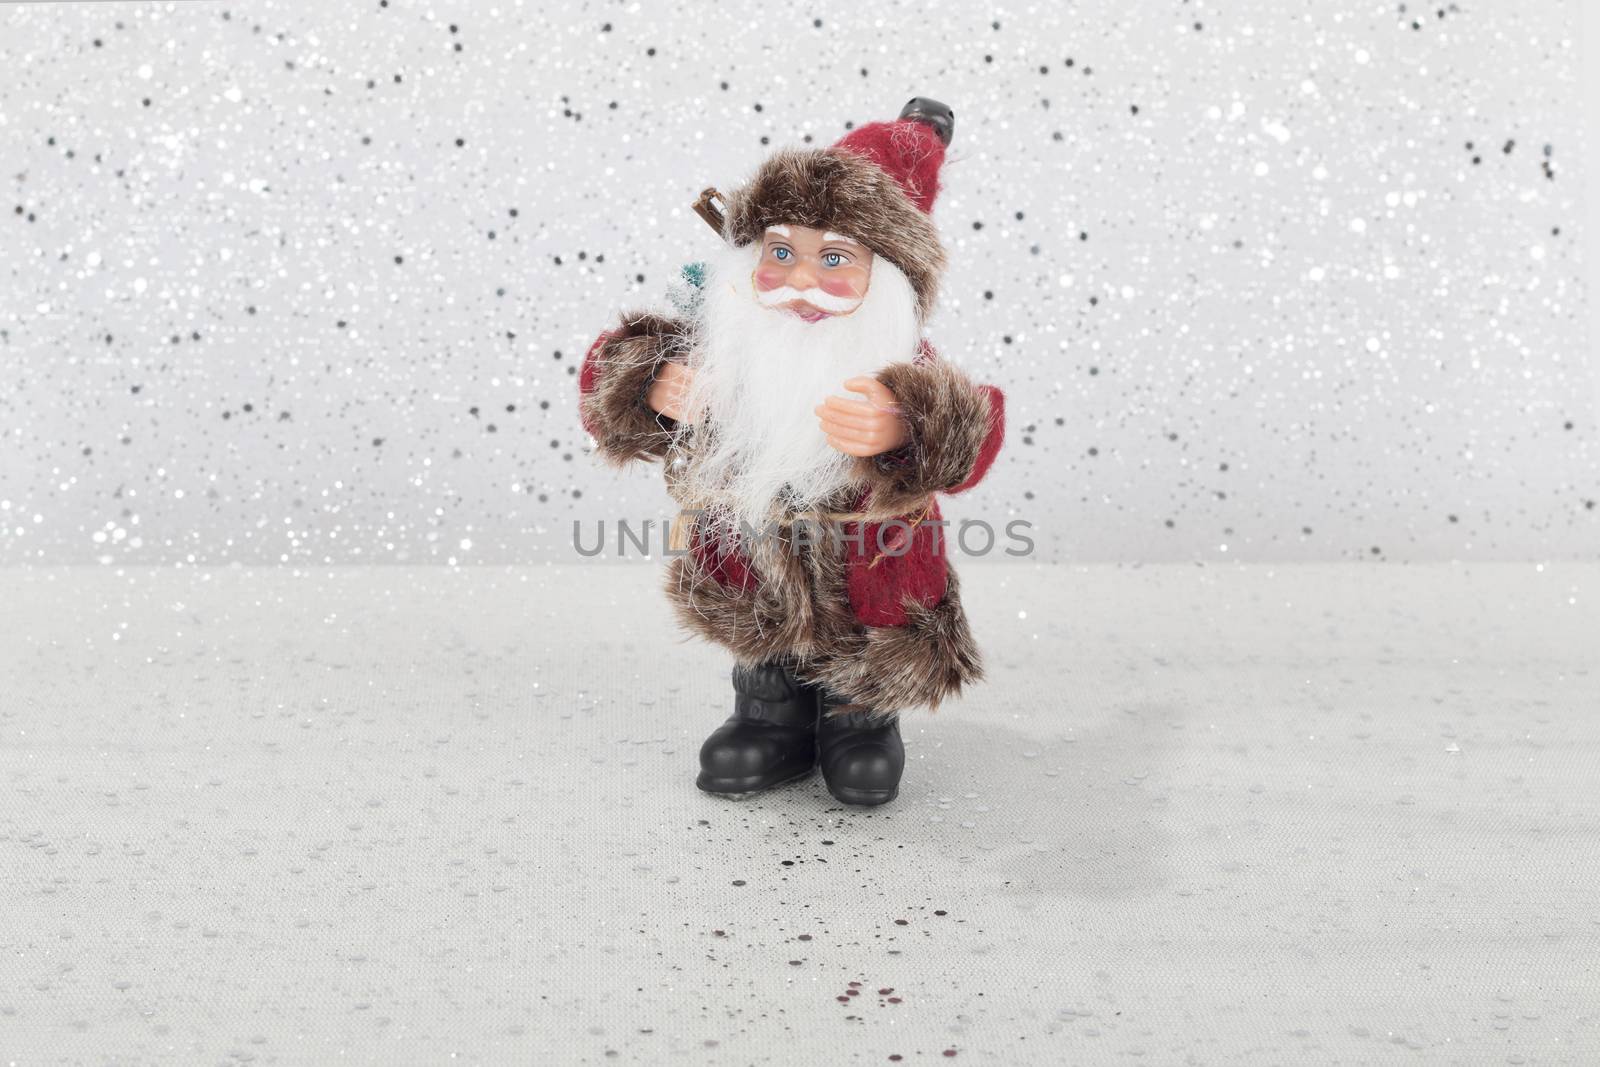 Santa Claus doll on silver and white background